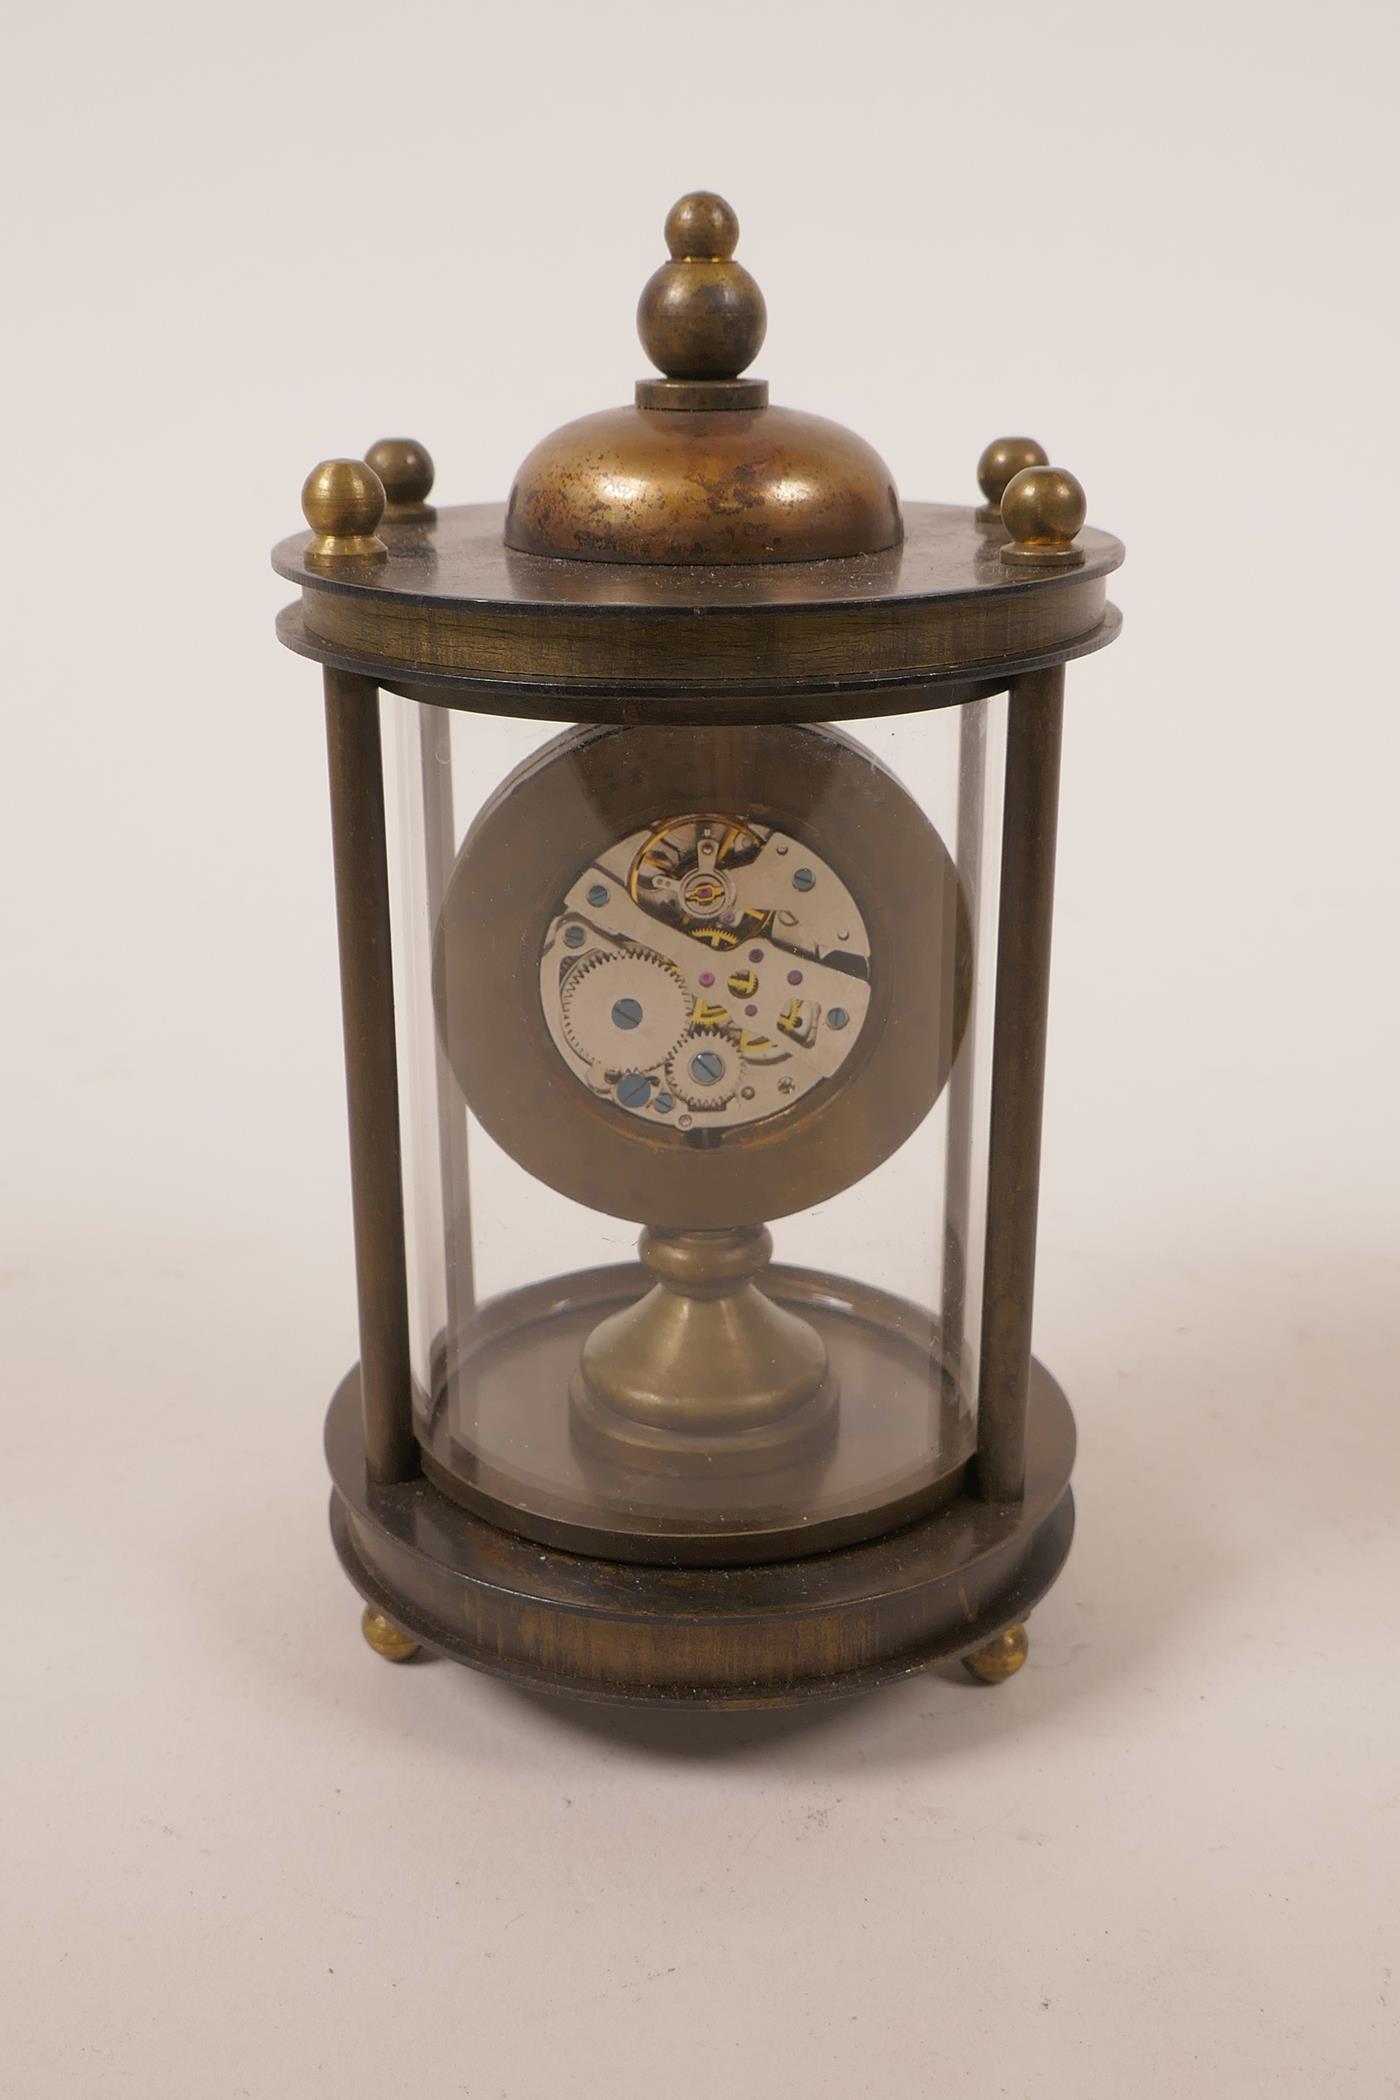 A bronze metal cased desk clock with an open movement, 4½" high - Image 2 of 3